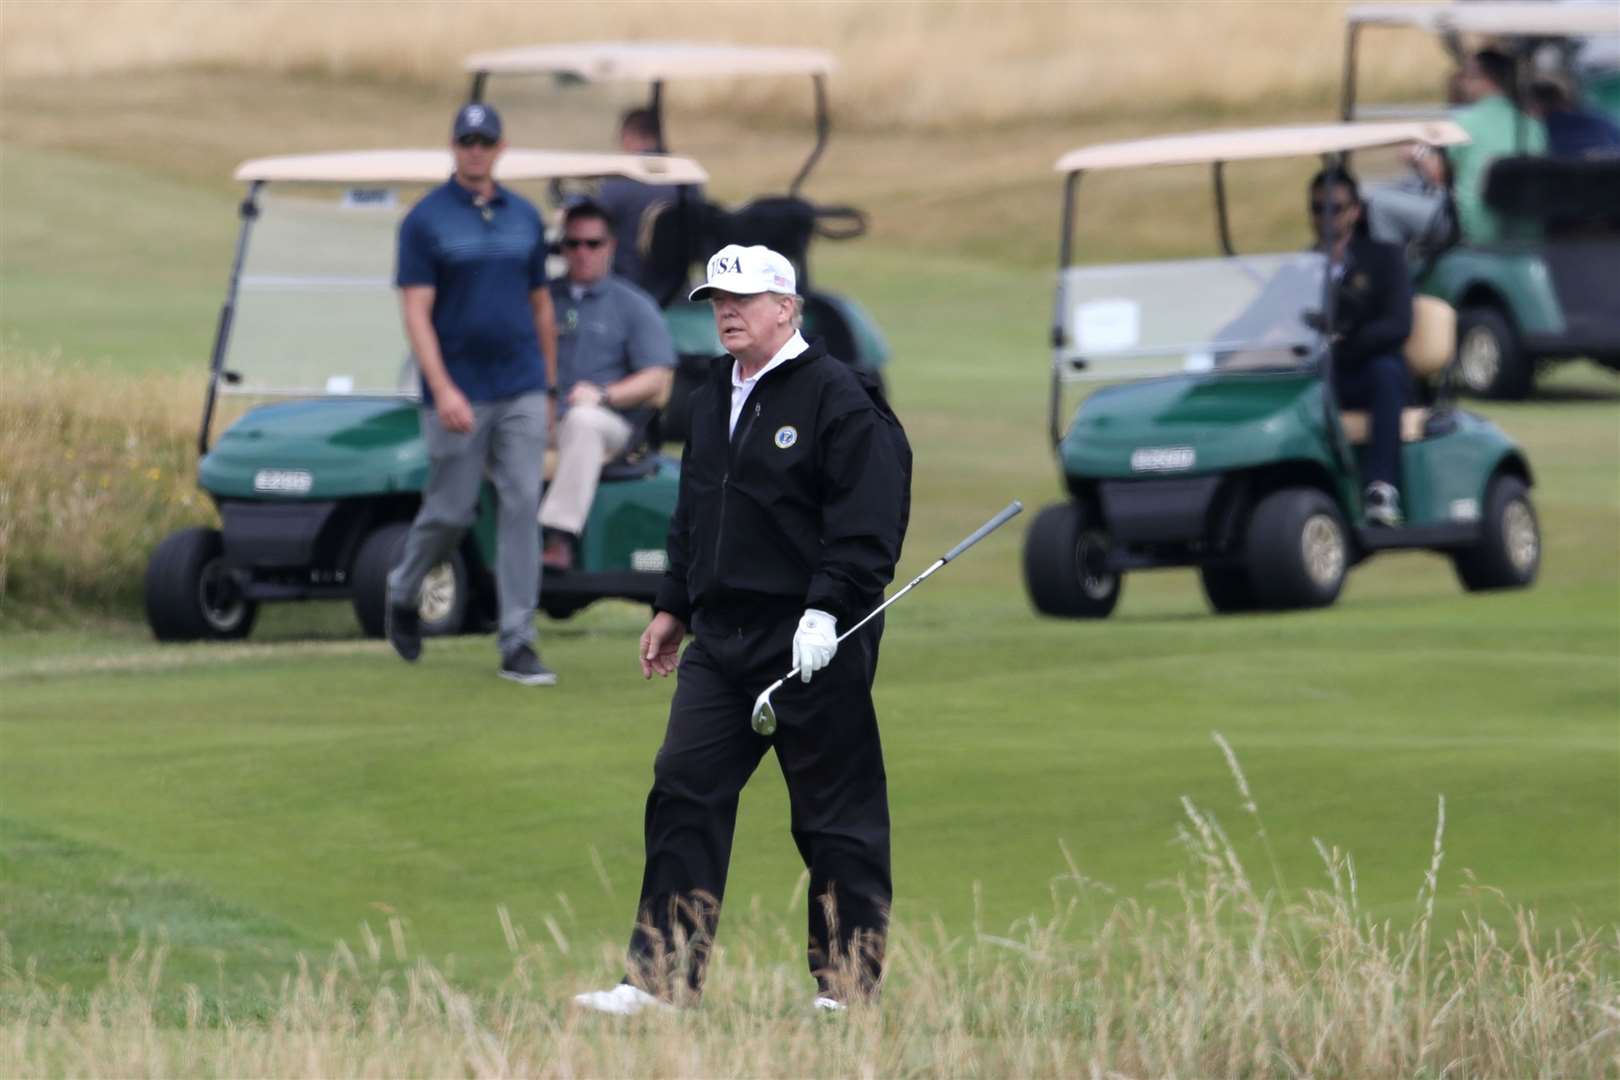 Donald Trump played golf at Turnberry in 2018 (Jane Barlow/PA)